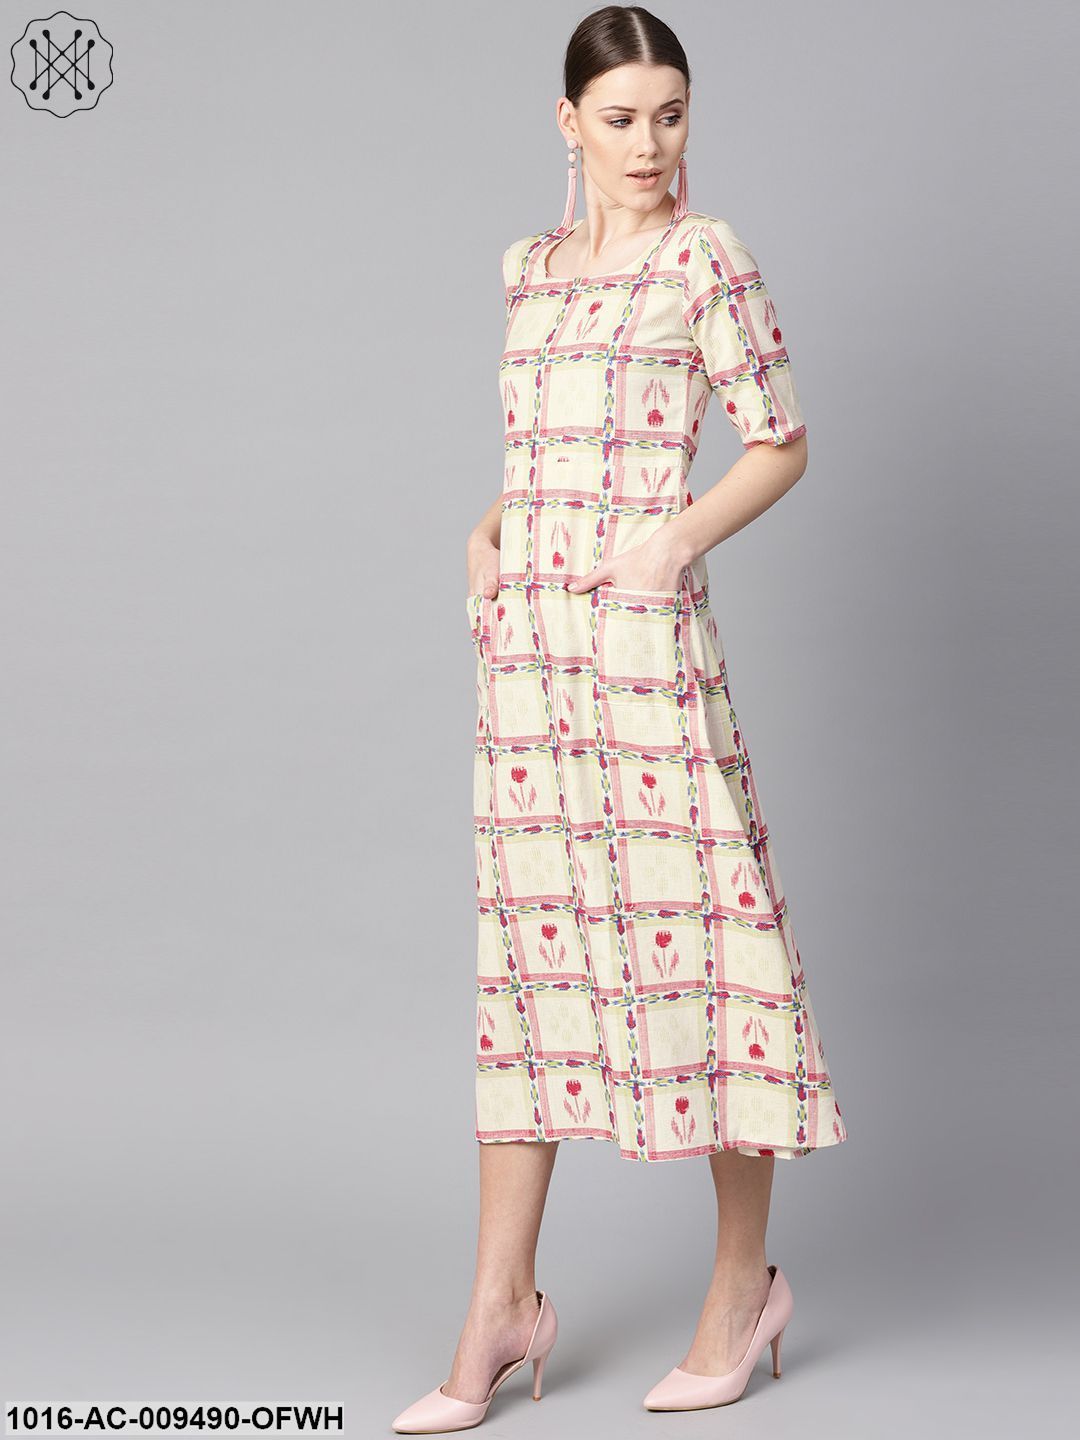 White Floral Ikat Print Square Neck Aline Dress With Front Pockets.